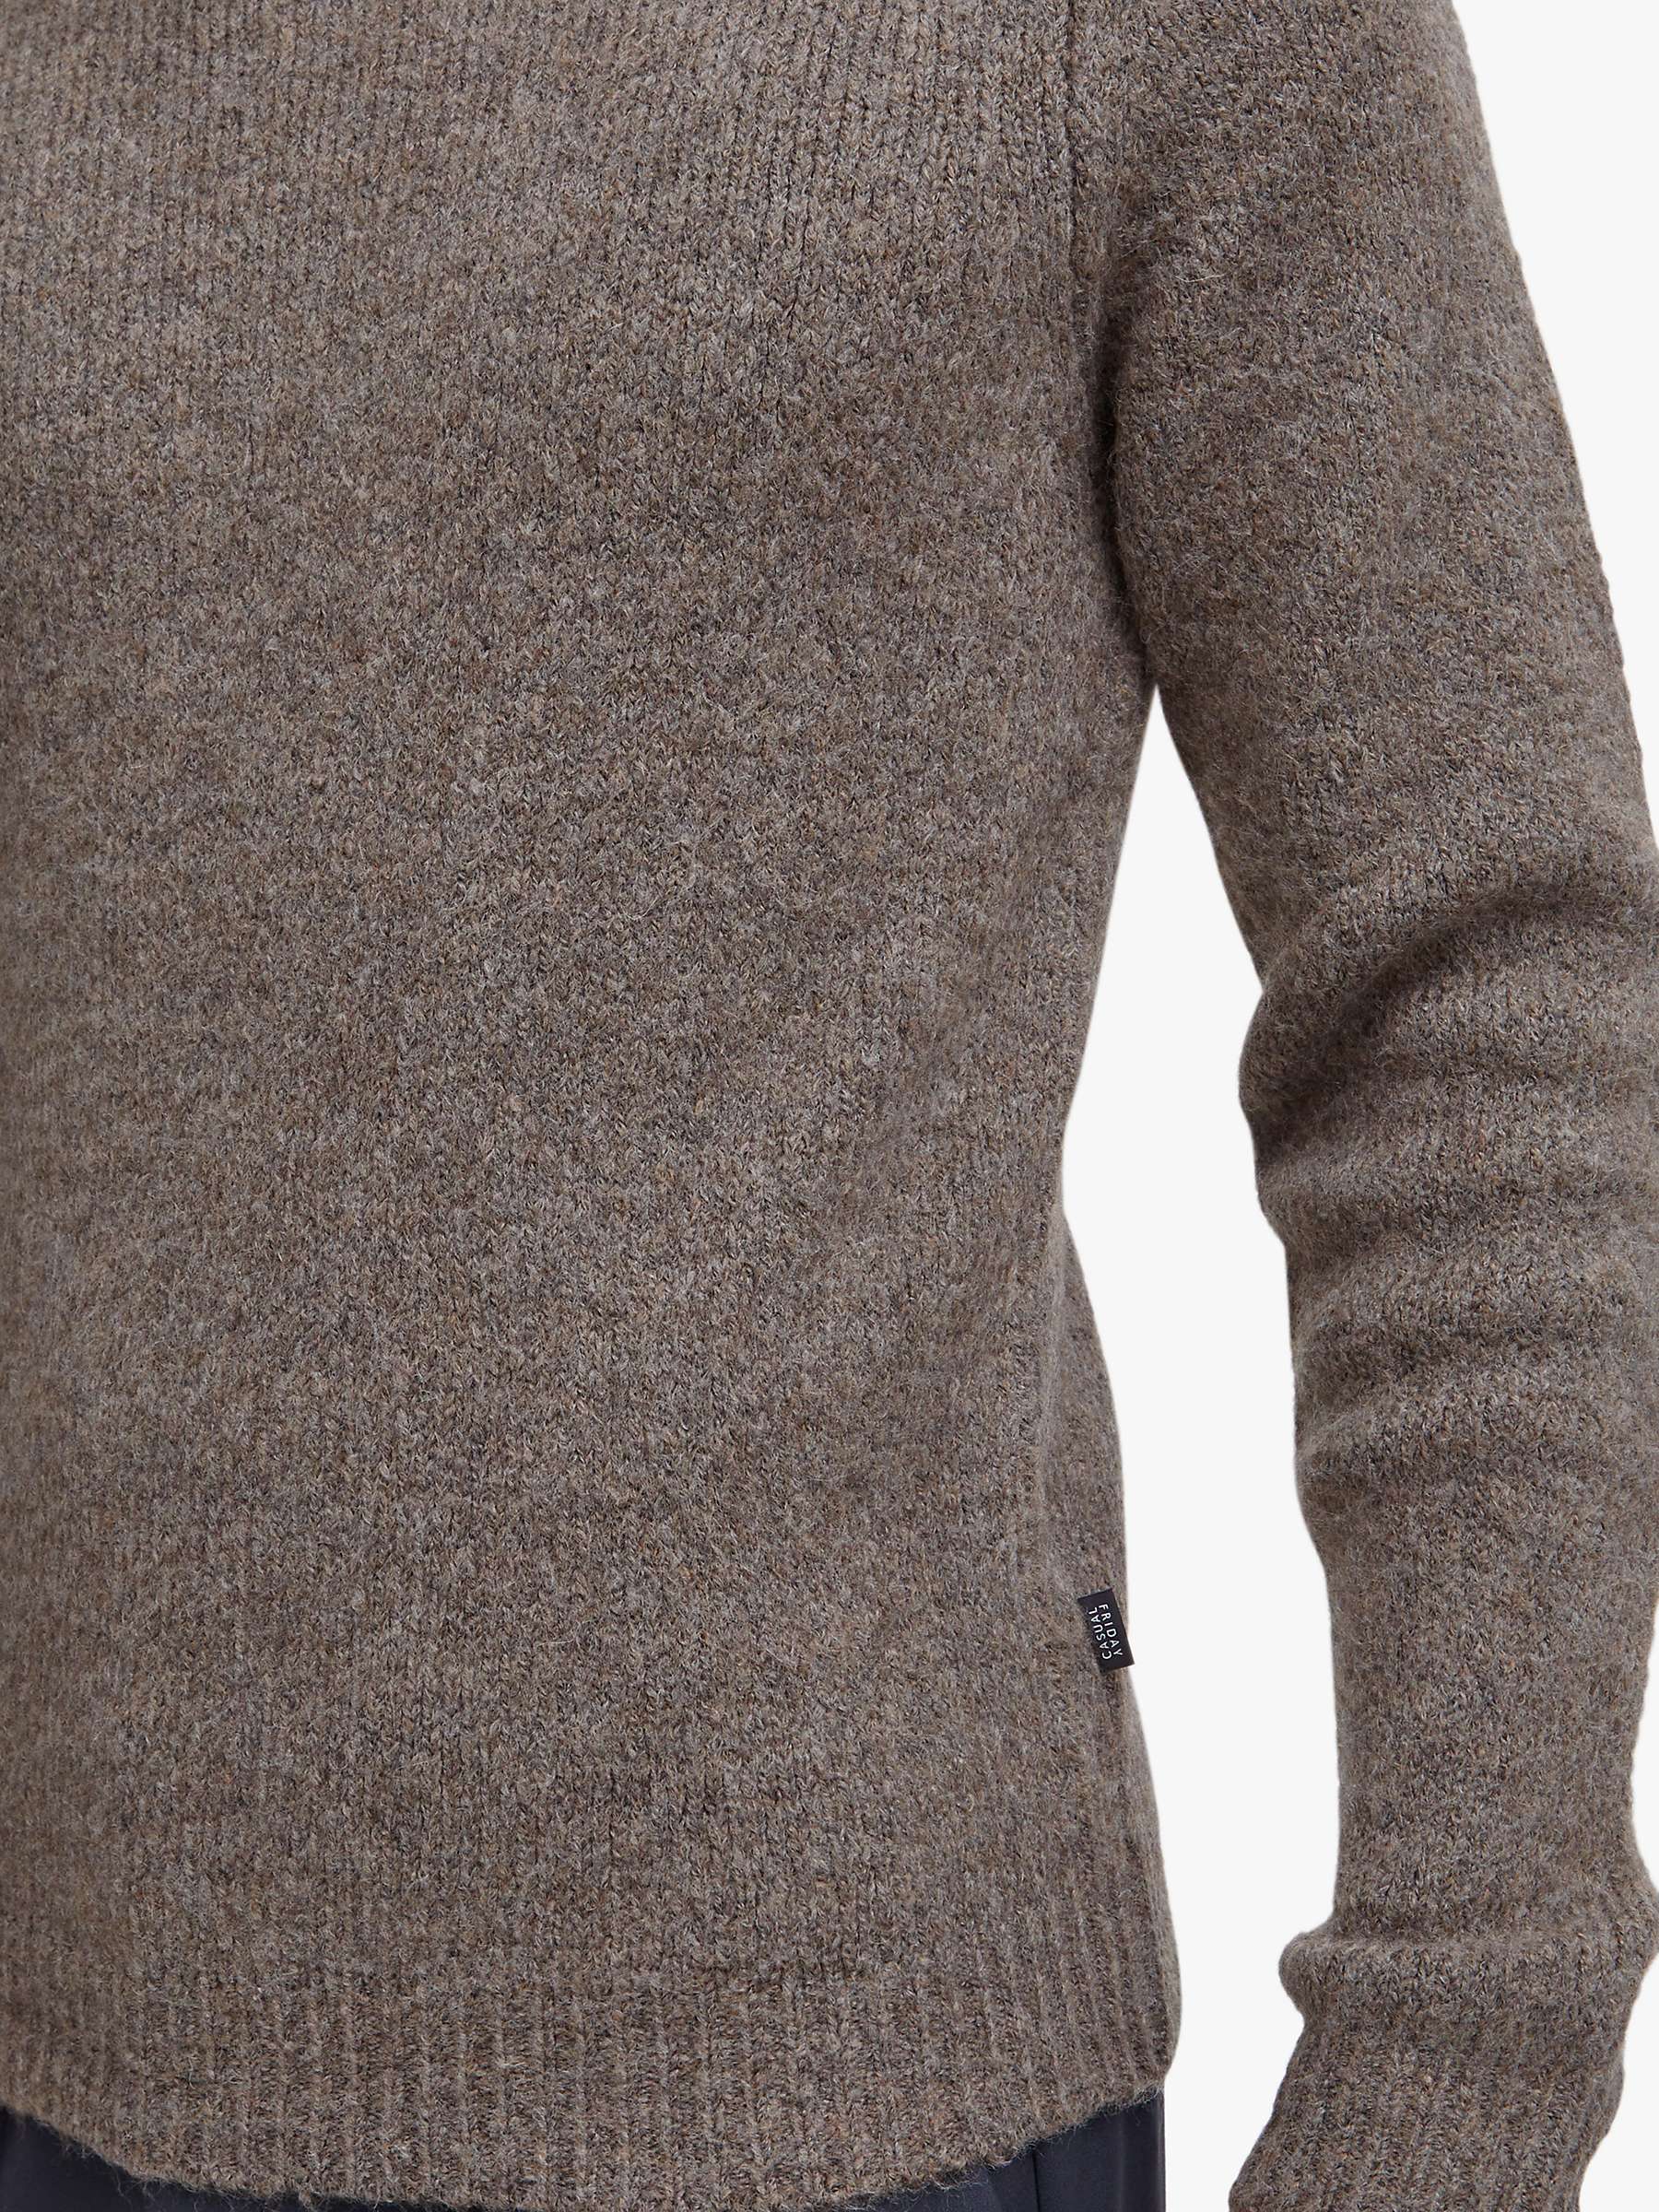 Buy Casual Friday Karl Lambswool Mix Knitted Jumper, Brown Online at johnlewis.com